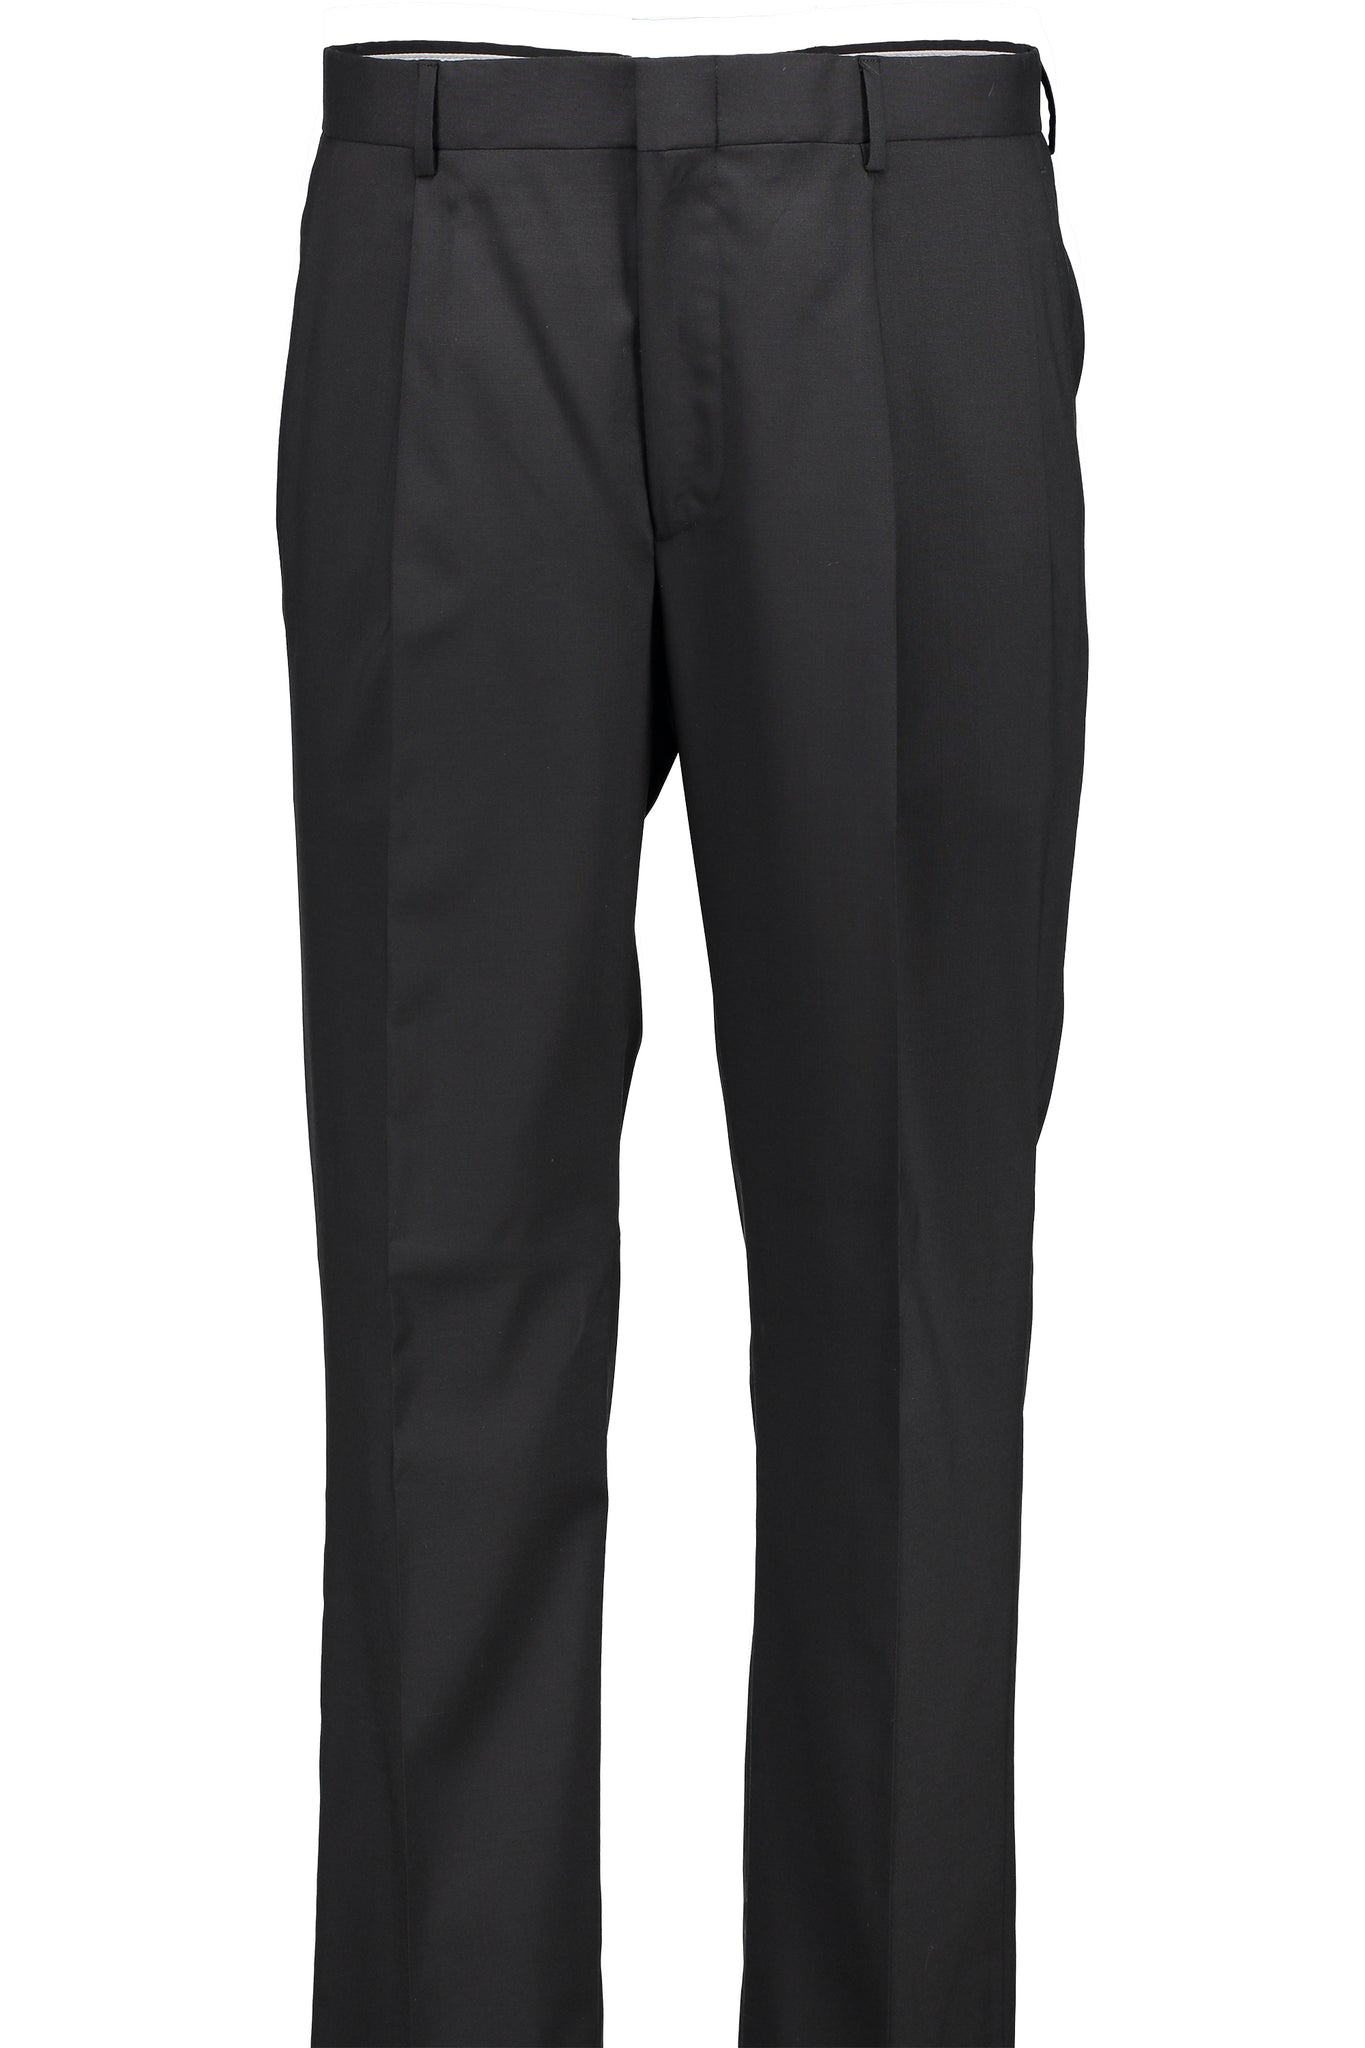 Men's Straight Fit Pleated Suit Seperate Pant - Black - CA11NQ0M1NR